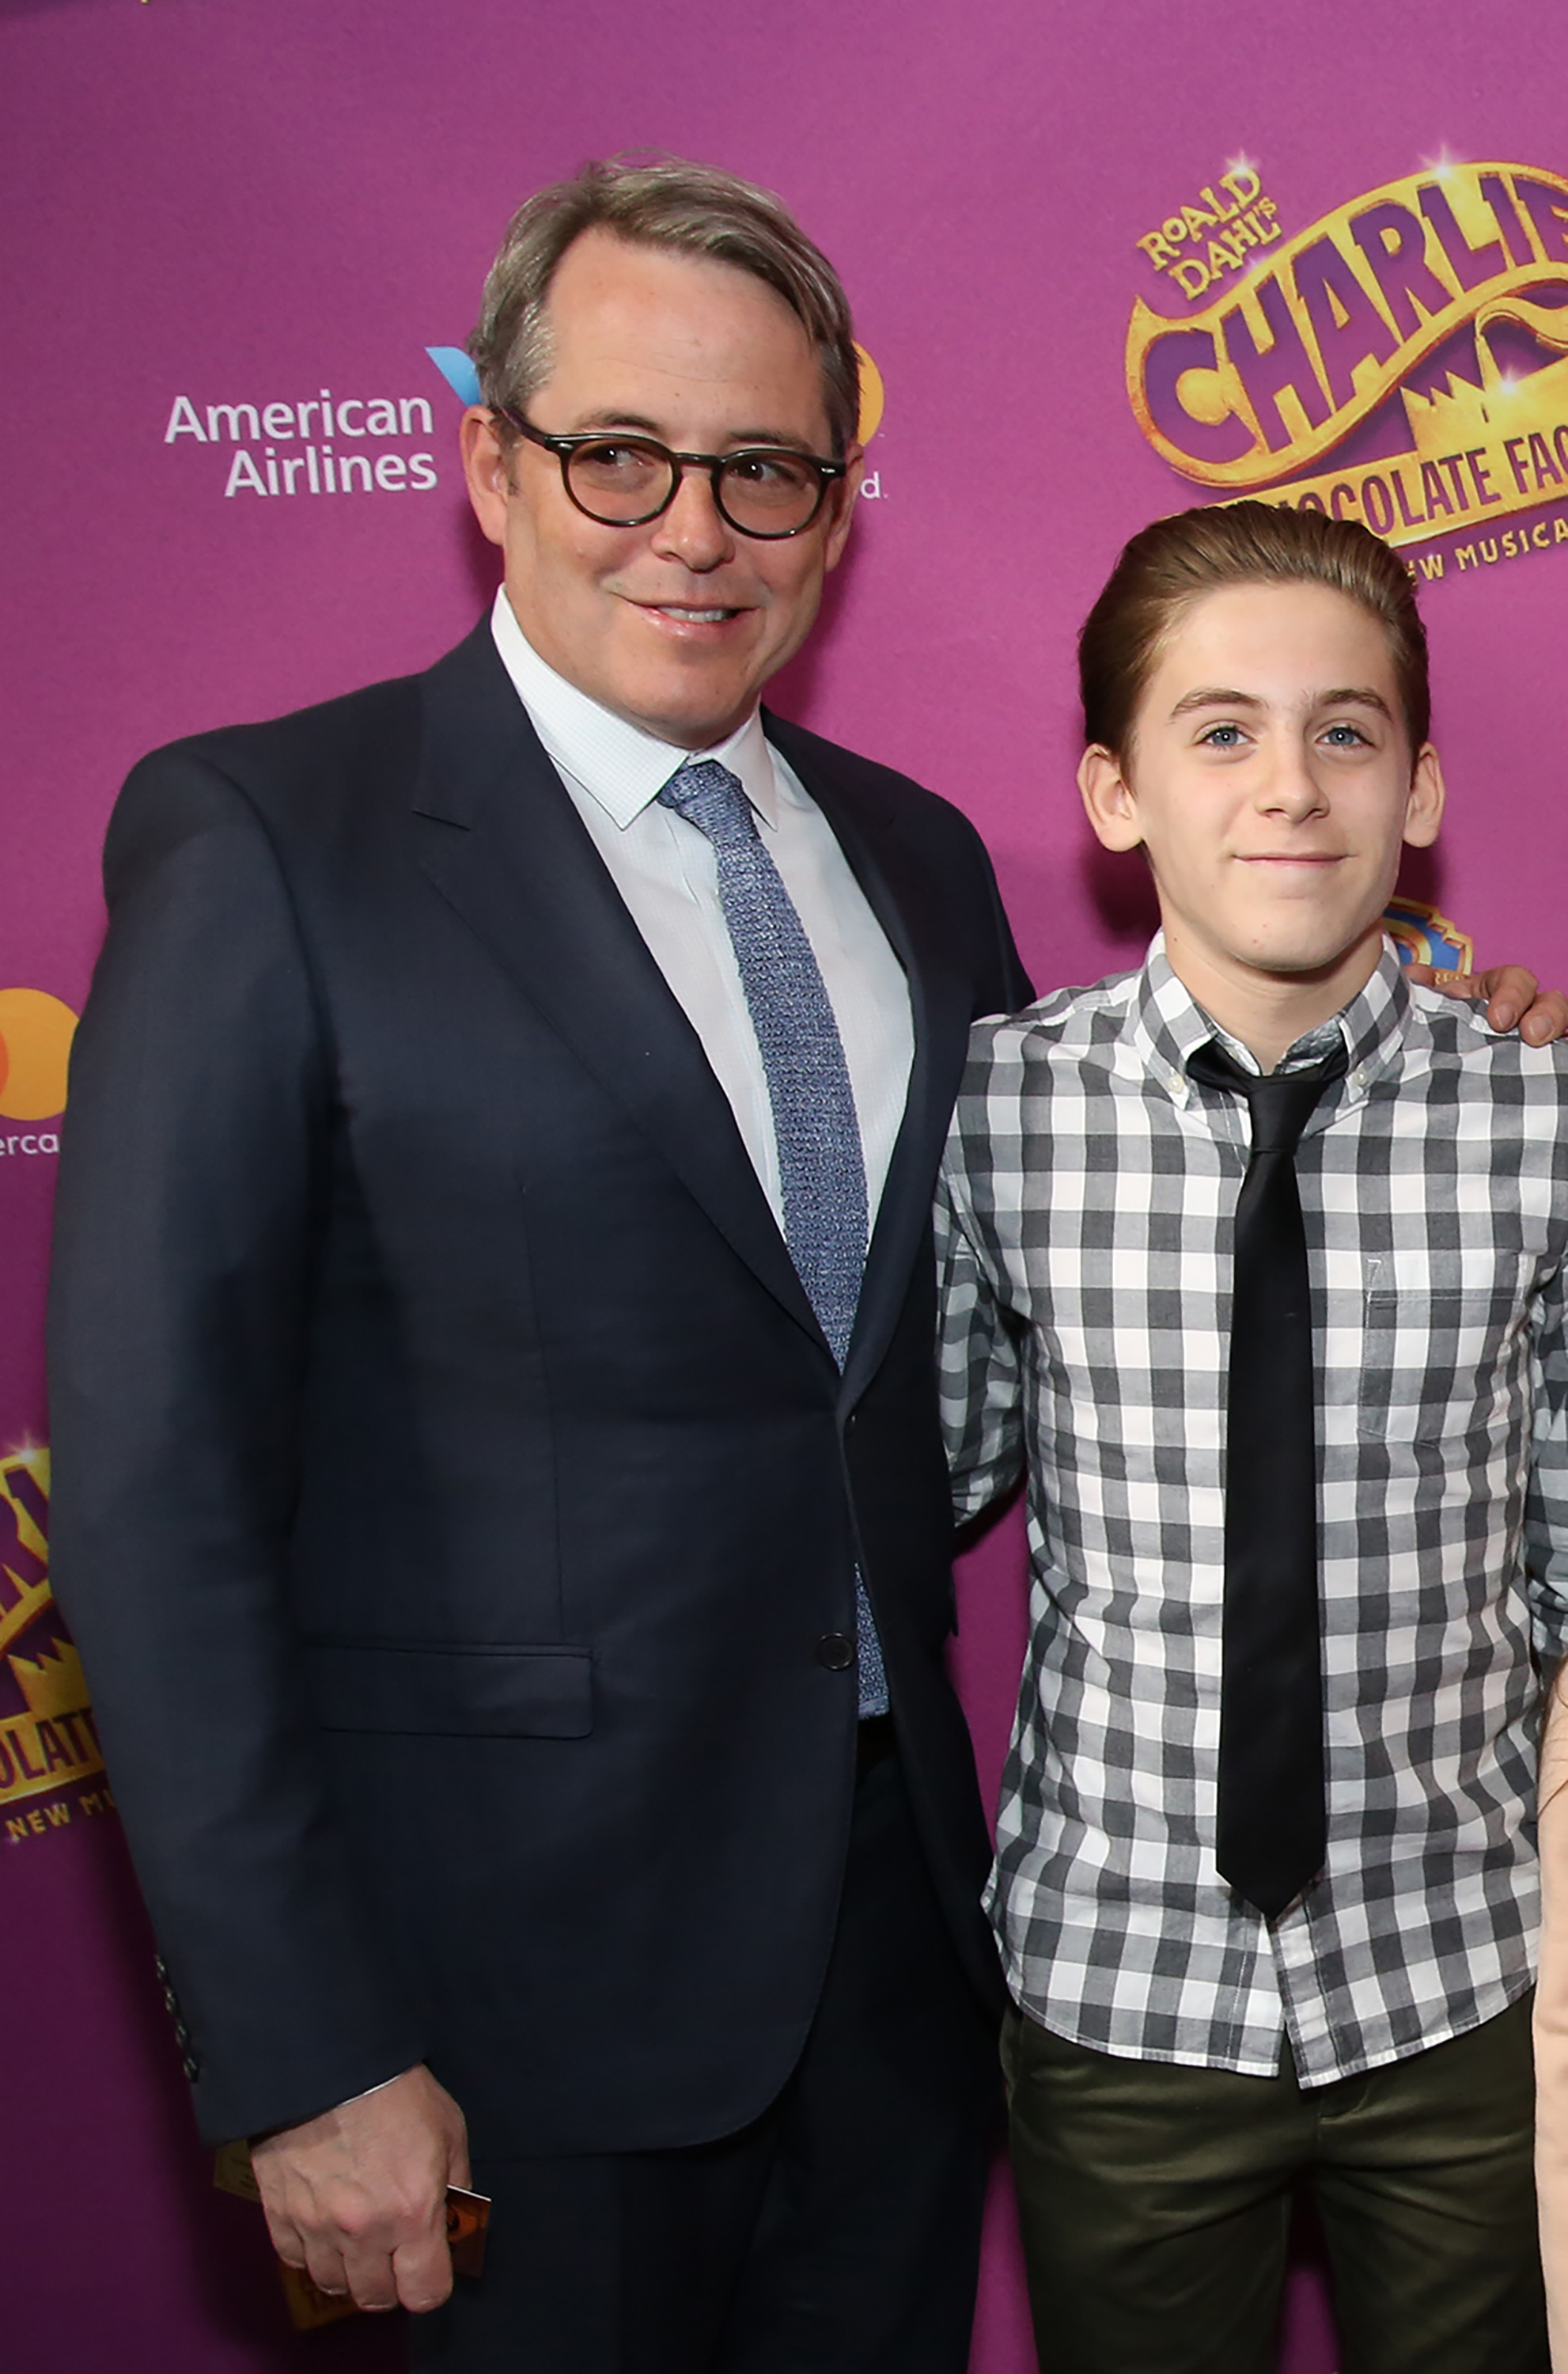 Matthew Broderick and James Broderick at the Broadway opening performance of "Charlie and the Chocolate Factory" at the Lunt-Fontanne Theatre on April 23, 2017, in New York City | Source: Getty Images